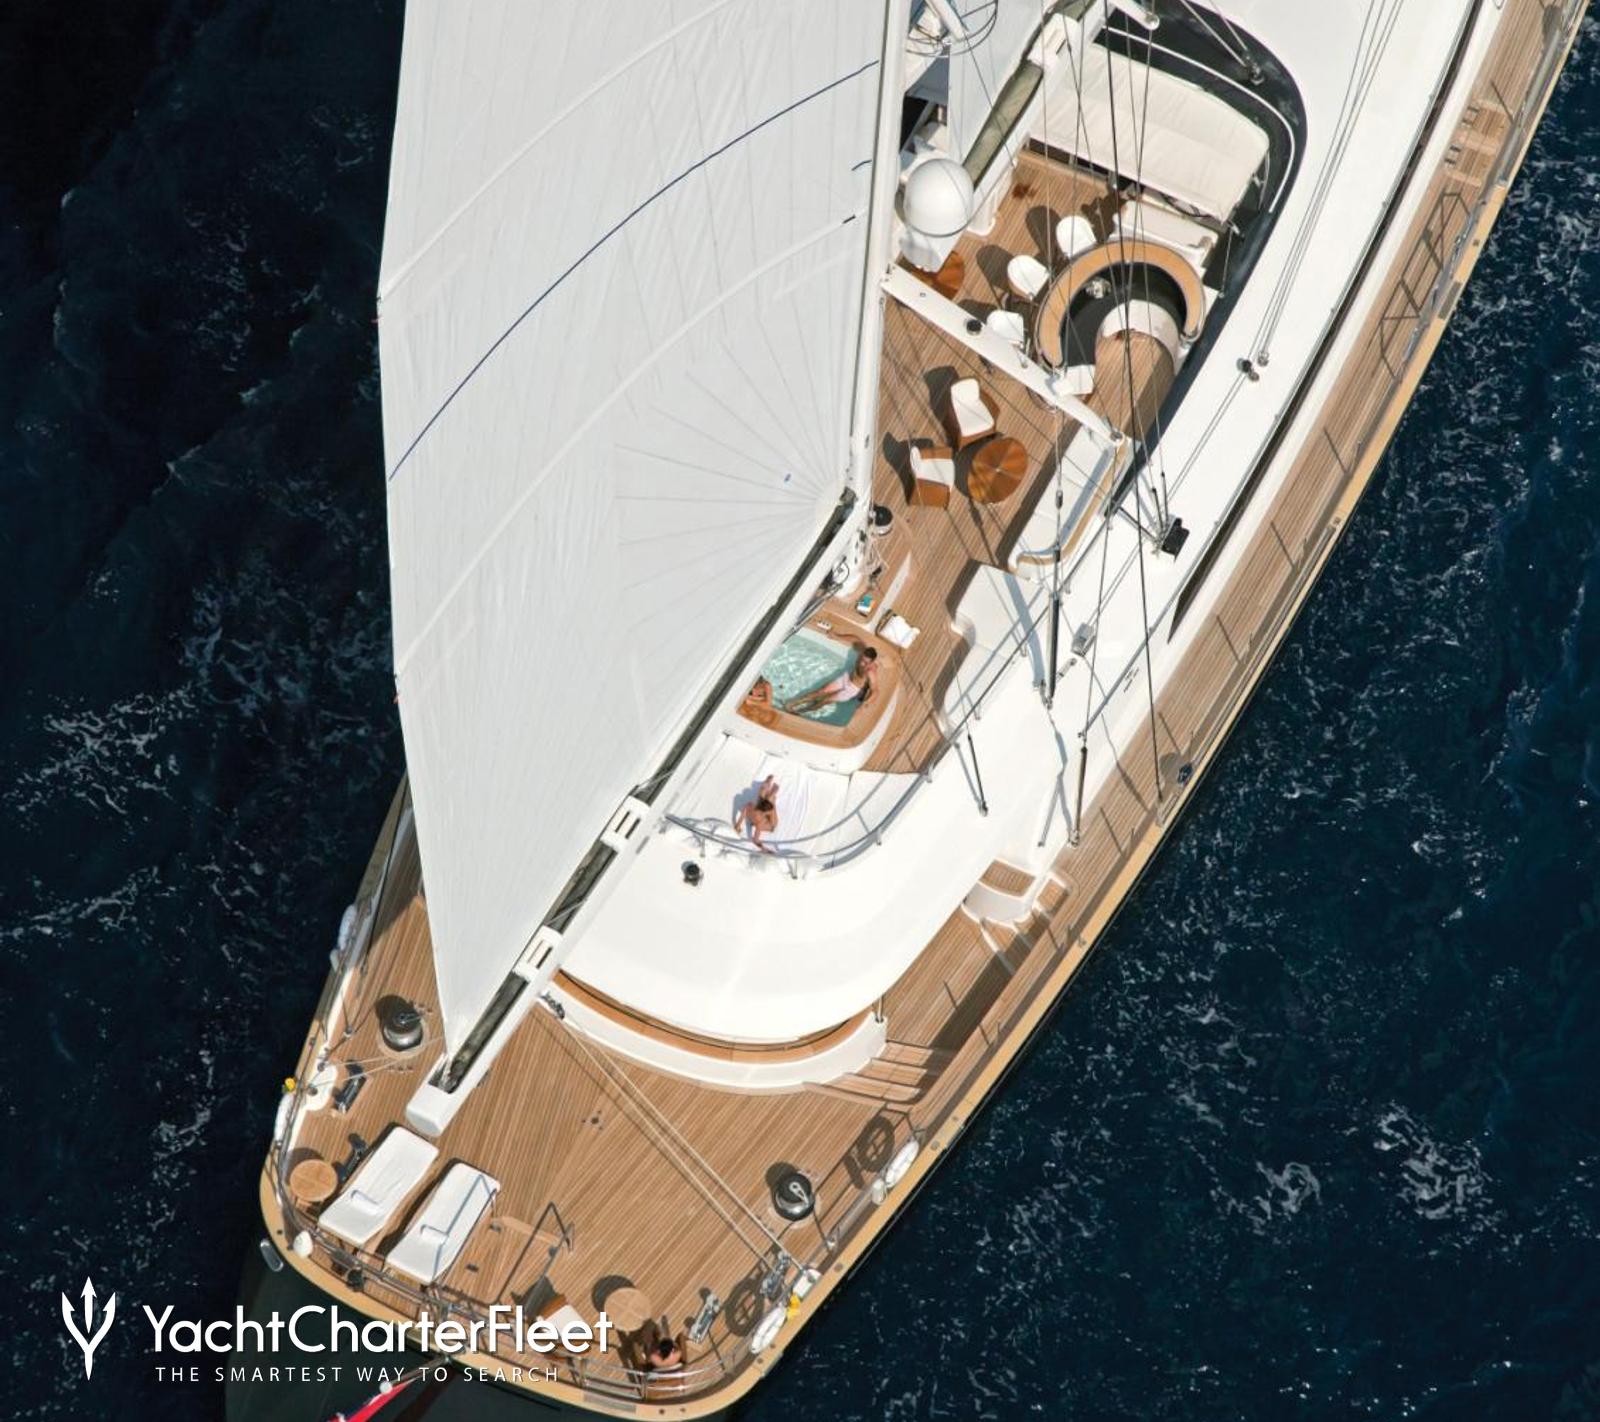 below deck sailing yacht cost of charter